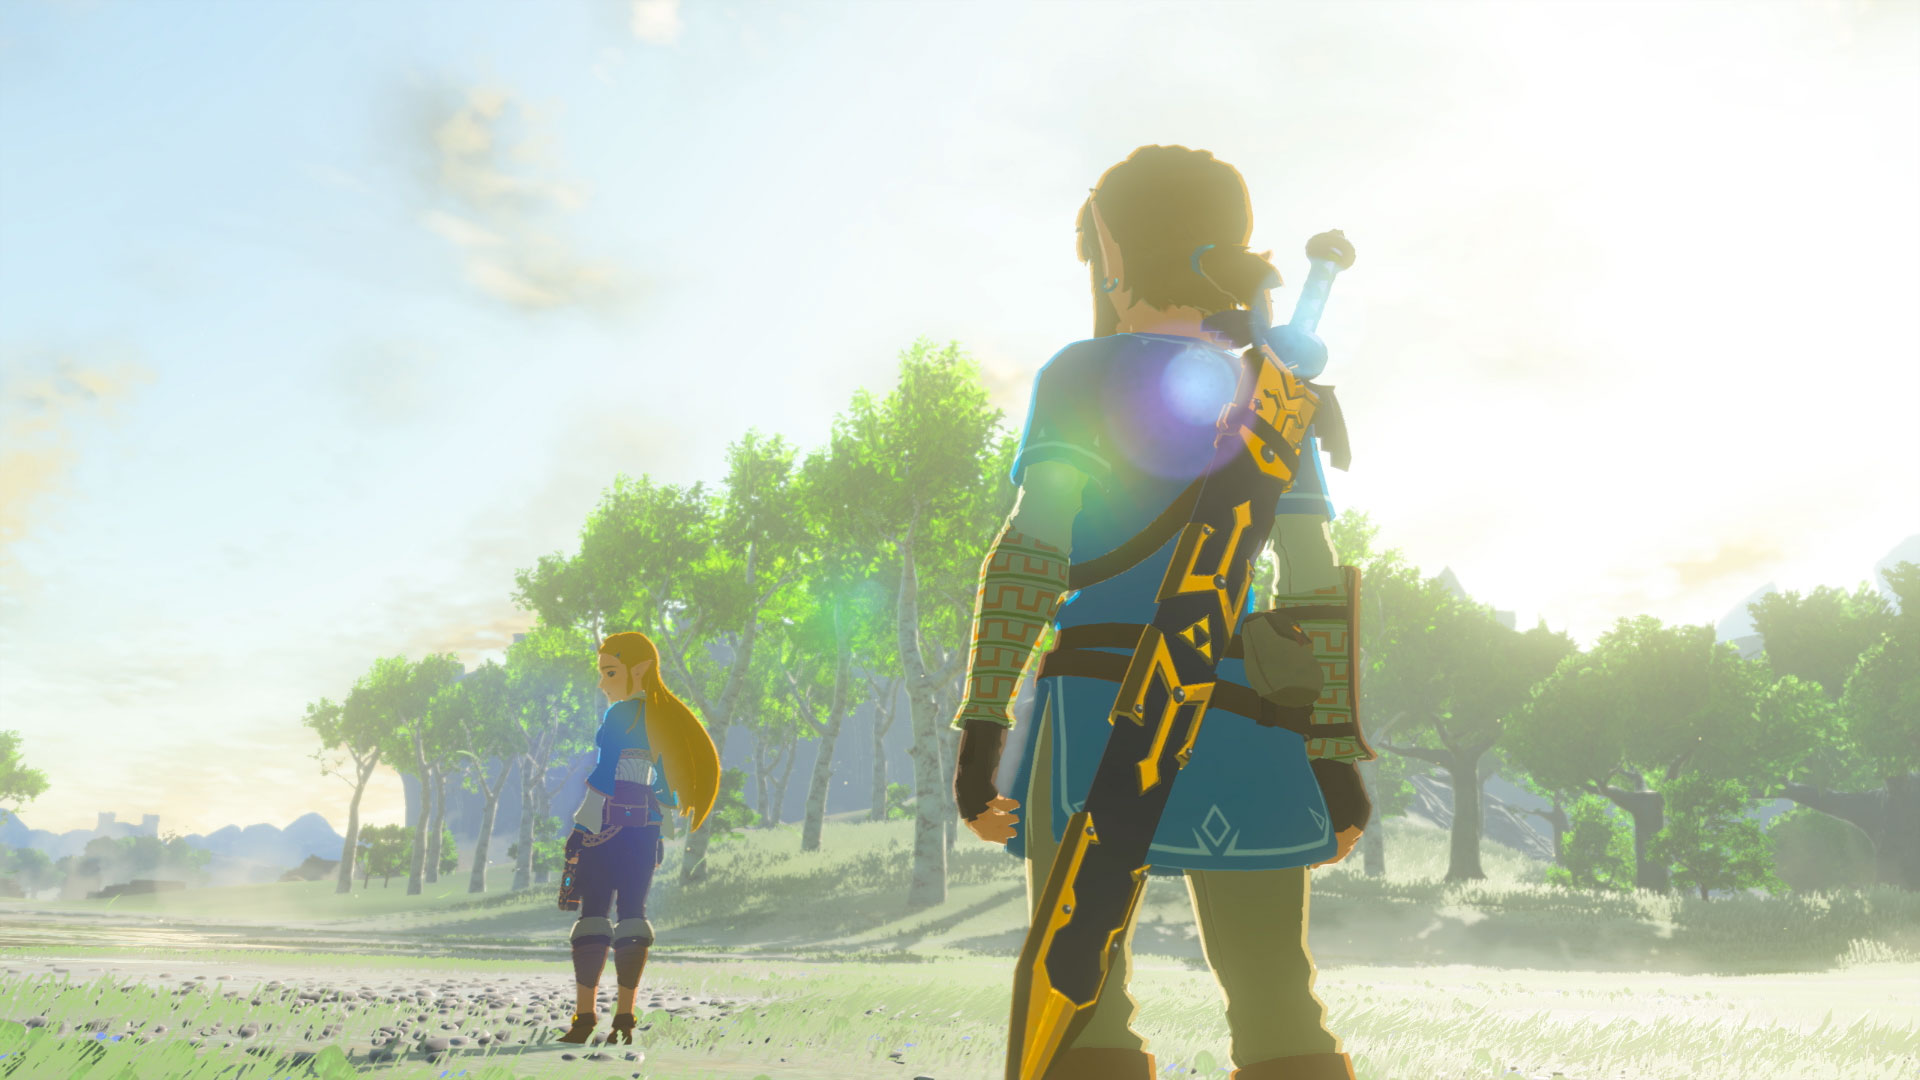 Sony Pictures Entertainment and Nintendo are teaming up to make a live-action film of The Legend of Zelda